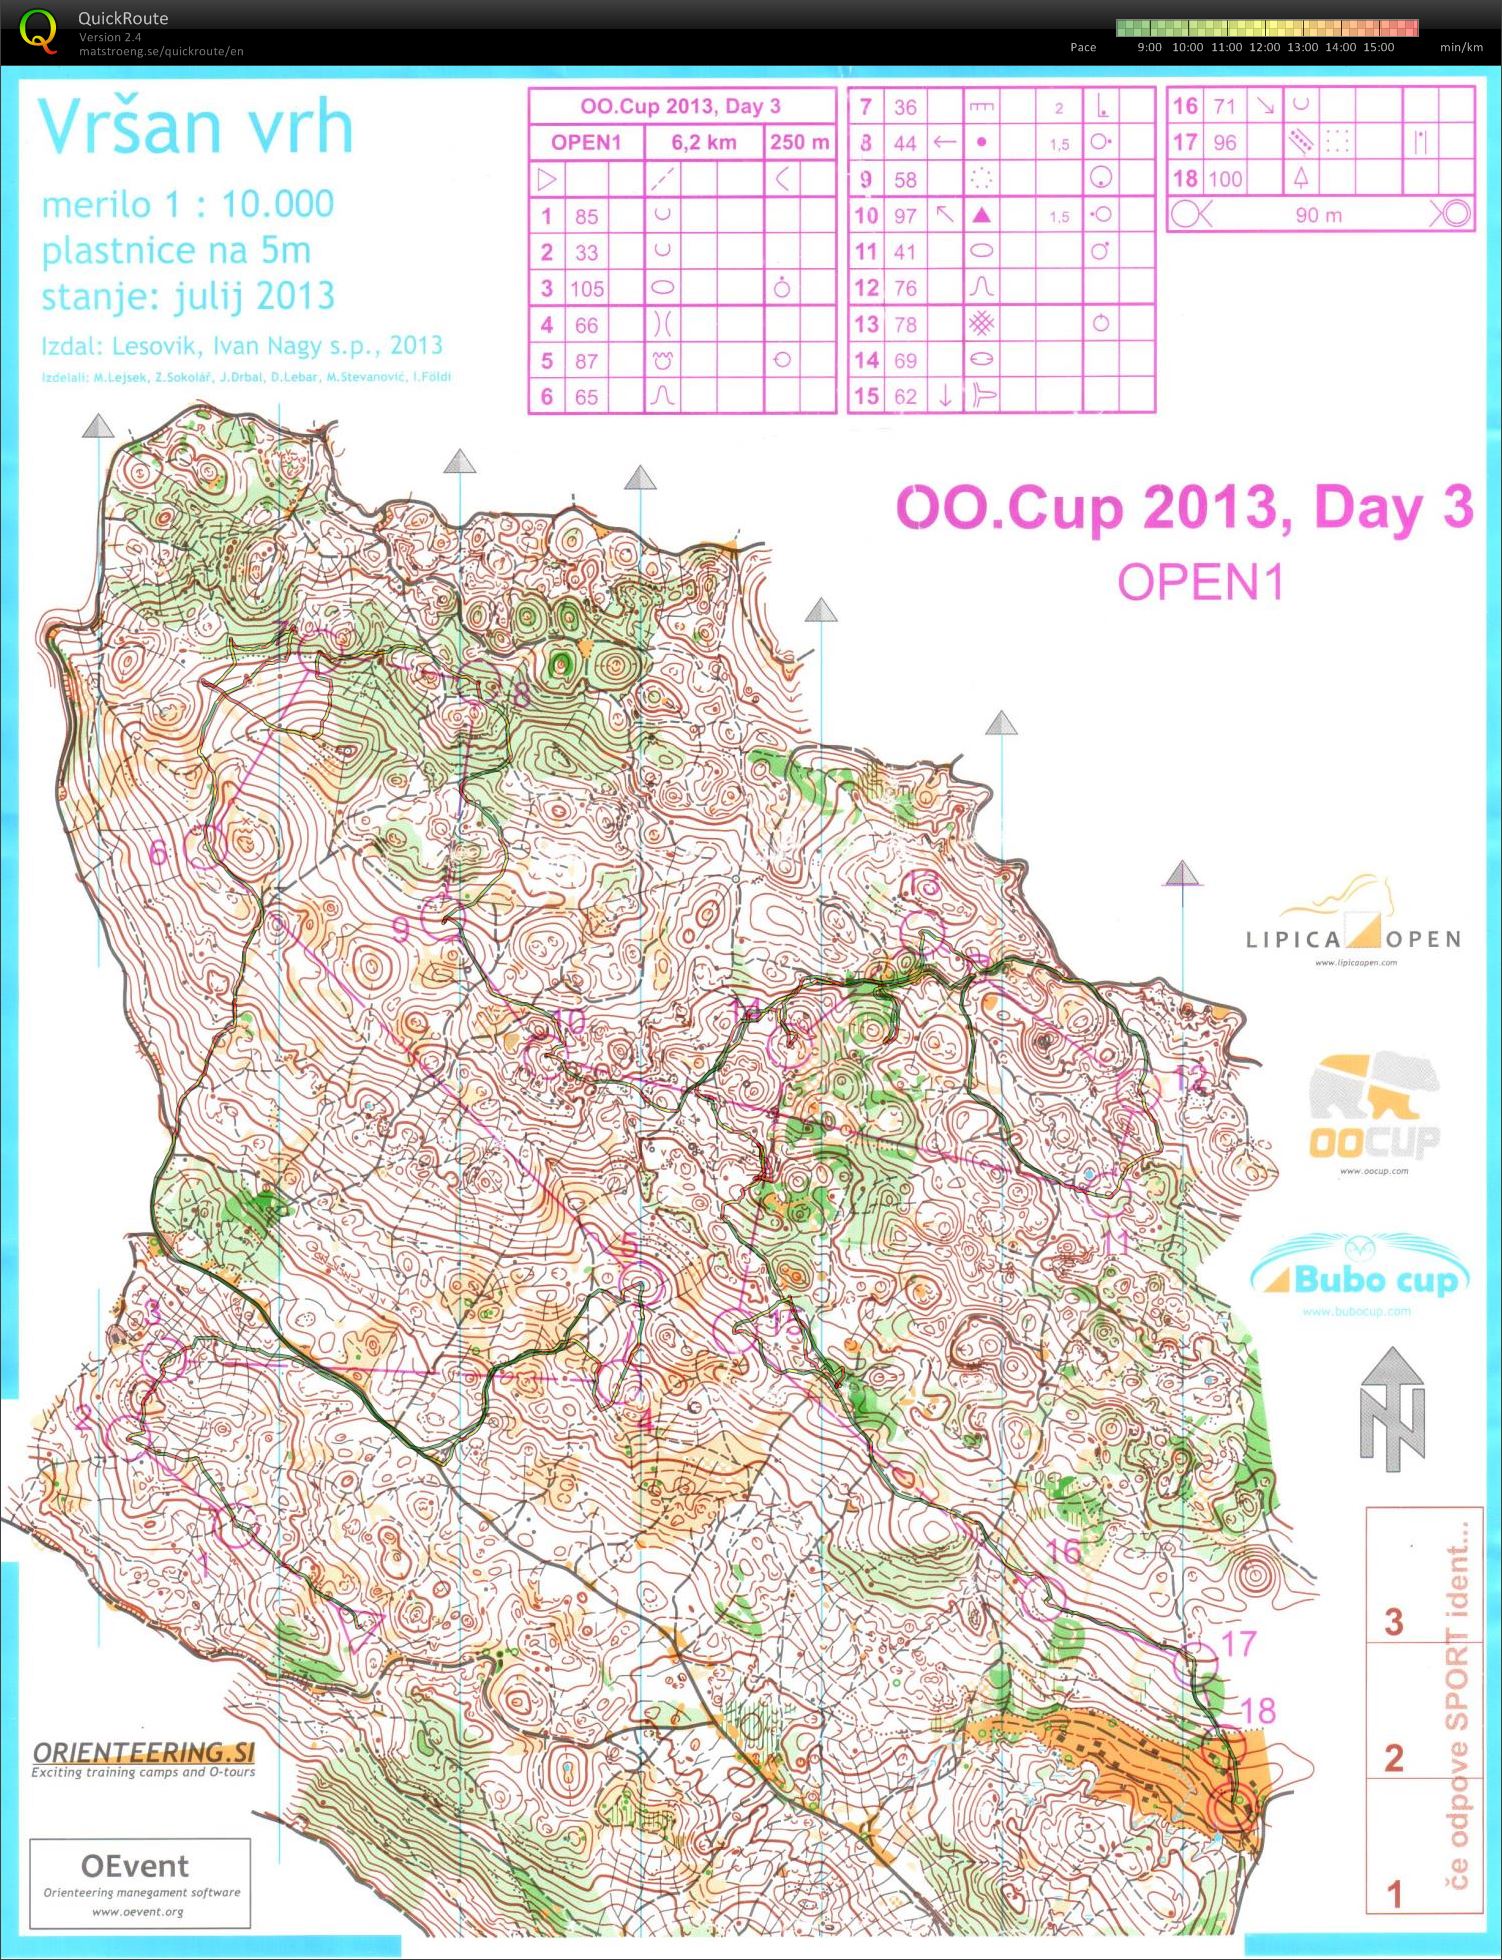 OOCup stage 3. (28-07-2013)